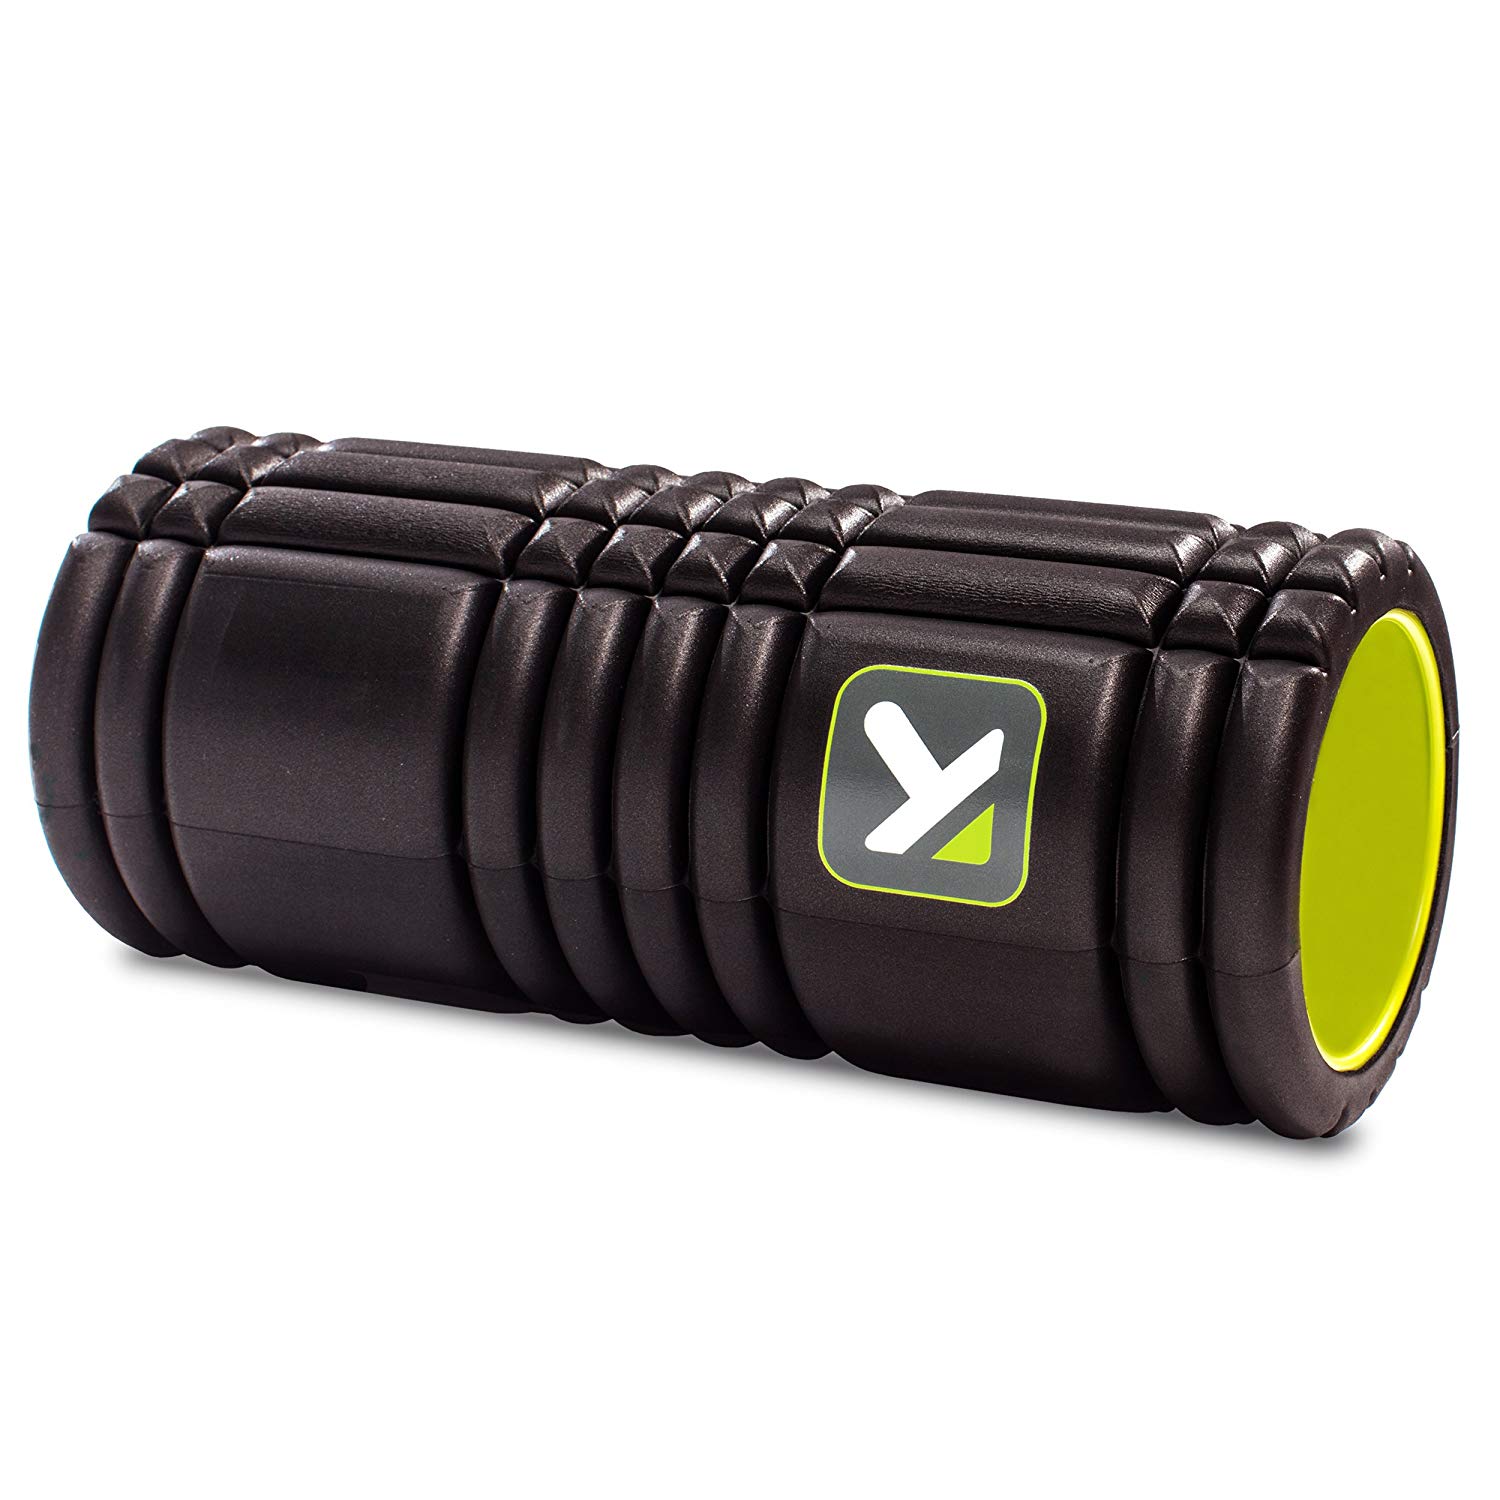  Foam rolling is essential to all my training programs. If you’re new to foam rolling, you should get a softer model. 